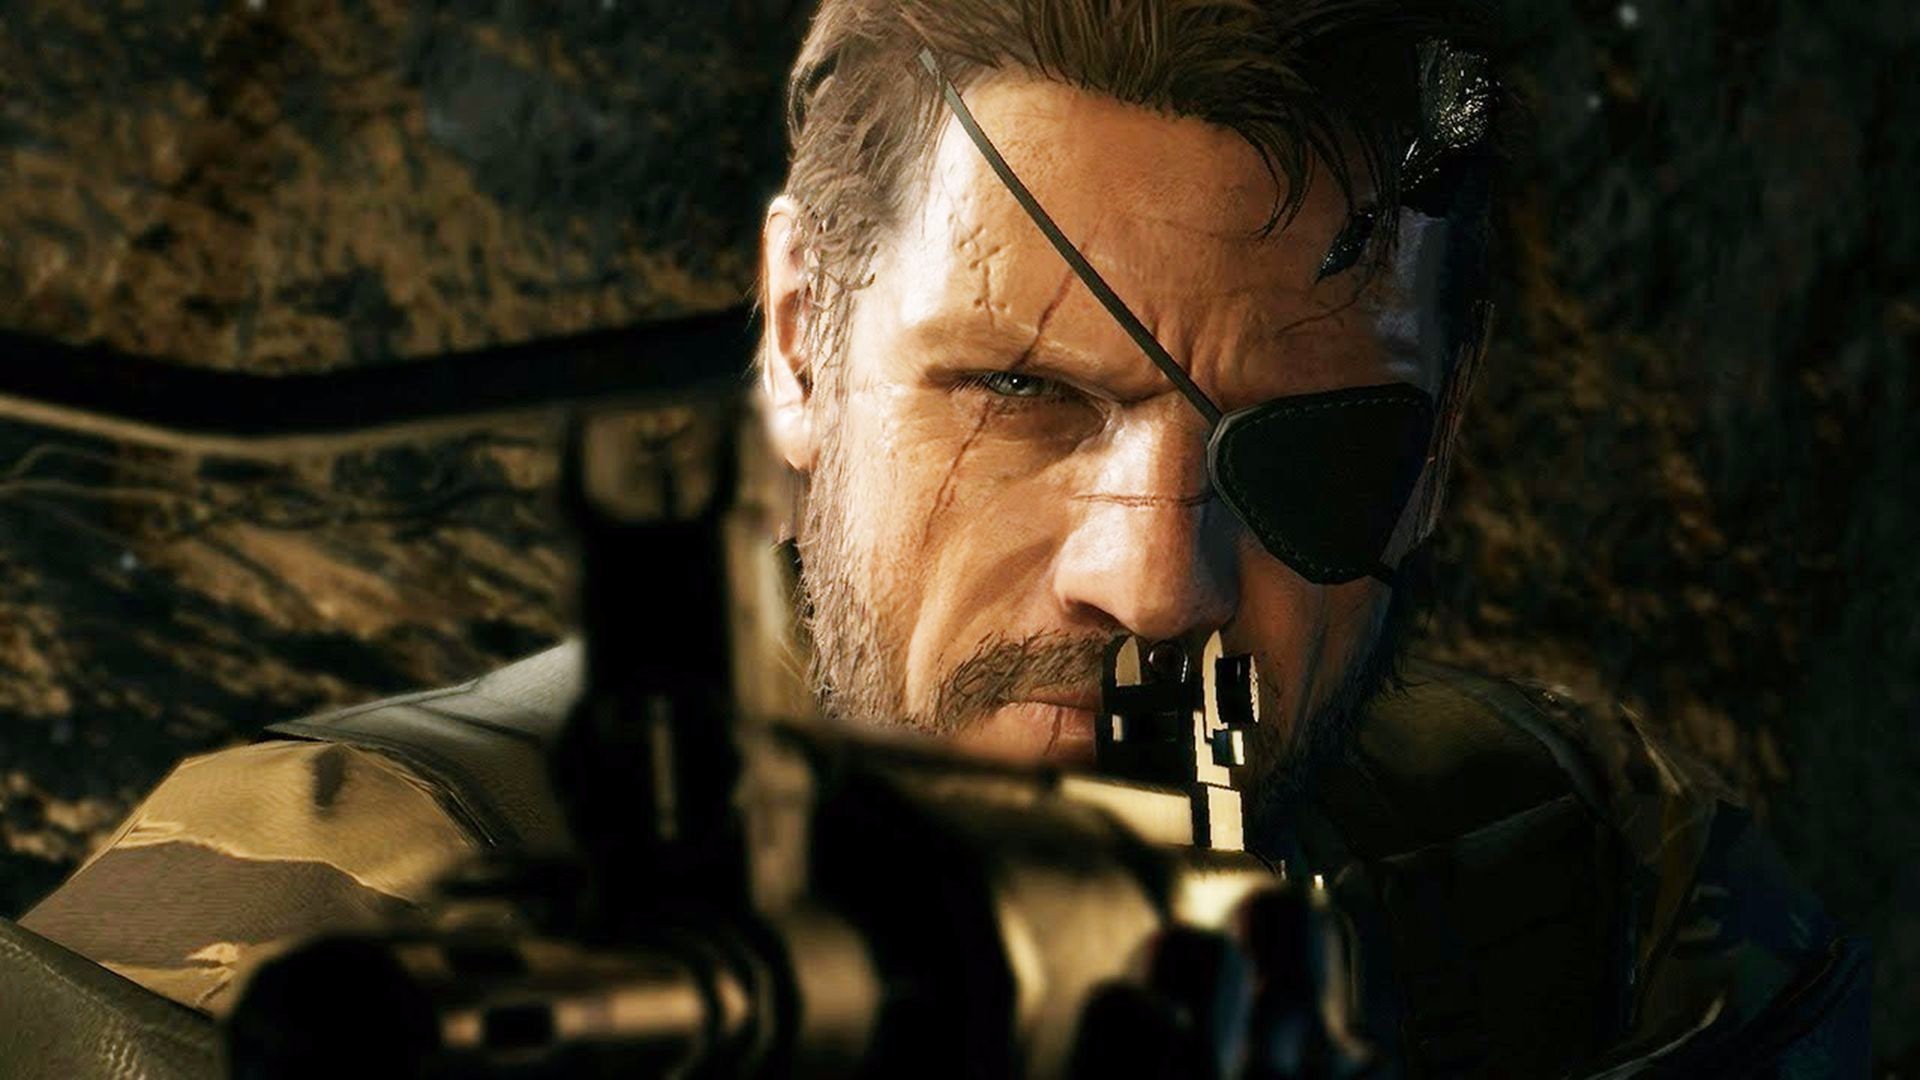 LOAD FILE: THE PONDEROUS CACOPHONY OF ‘THE PHANTOM PAIN’ IS BOTH EXHILARATING AND FRUSTRATING